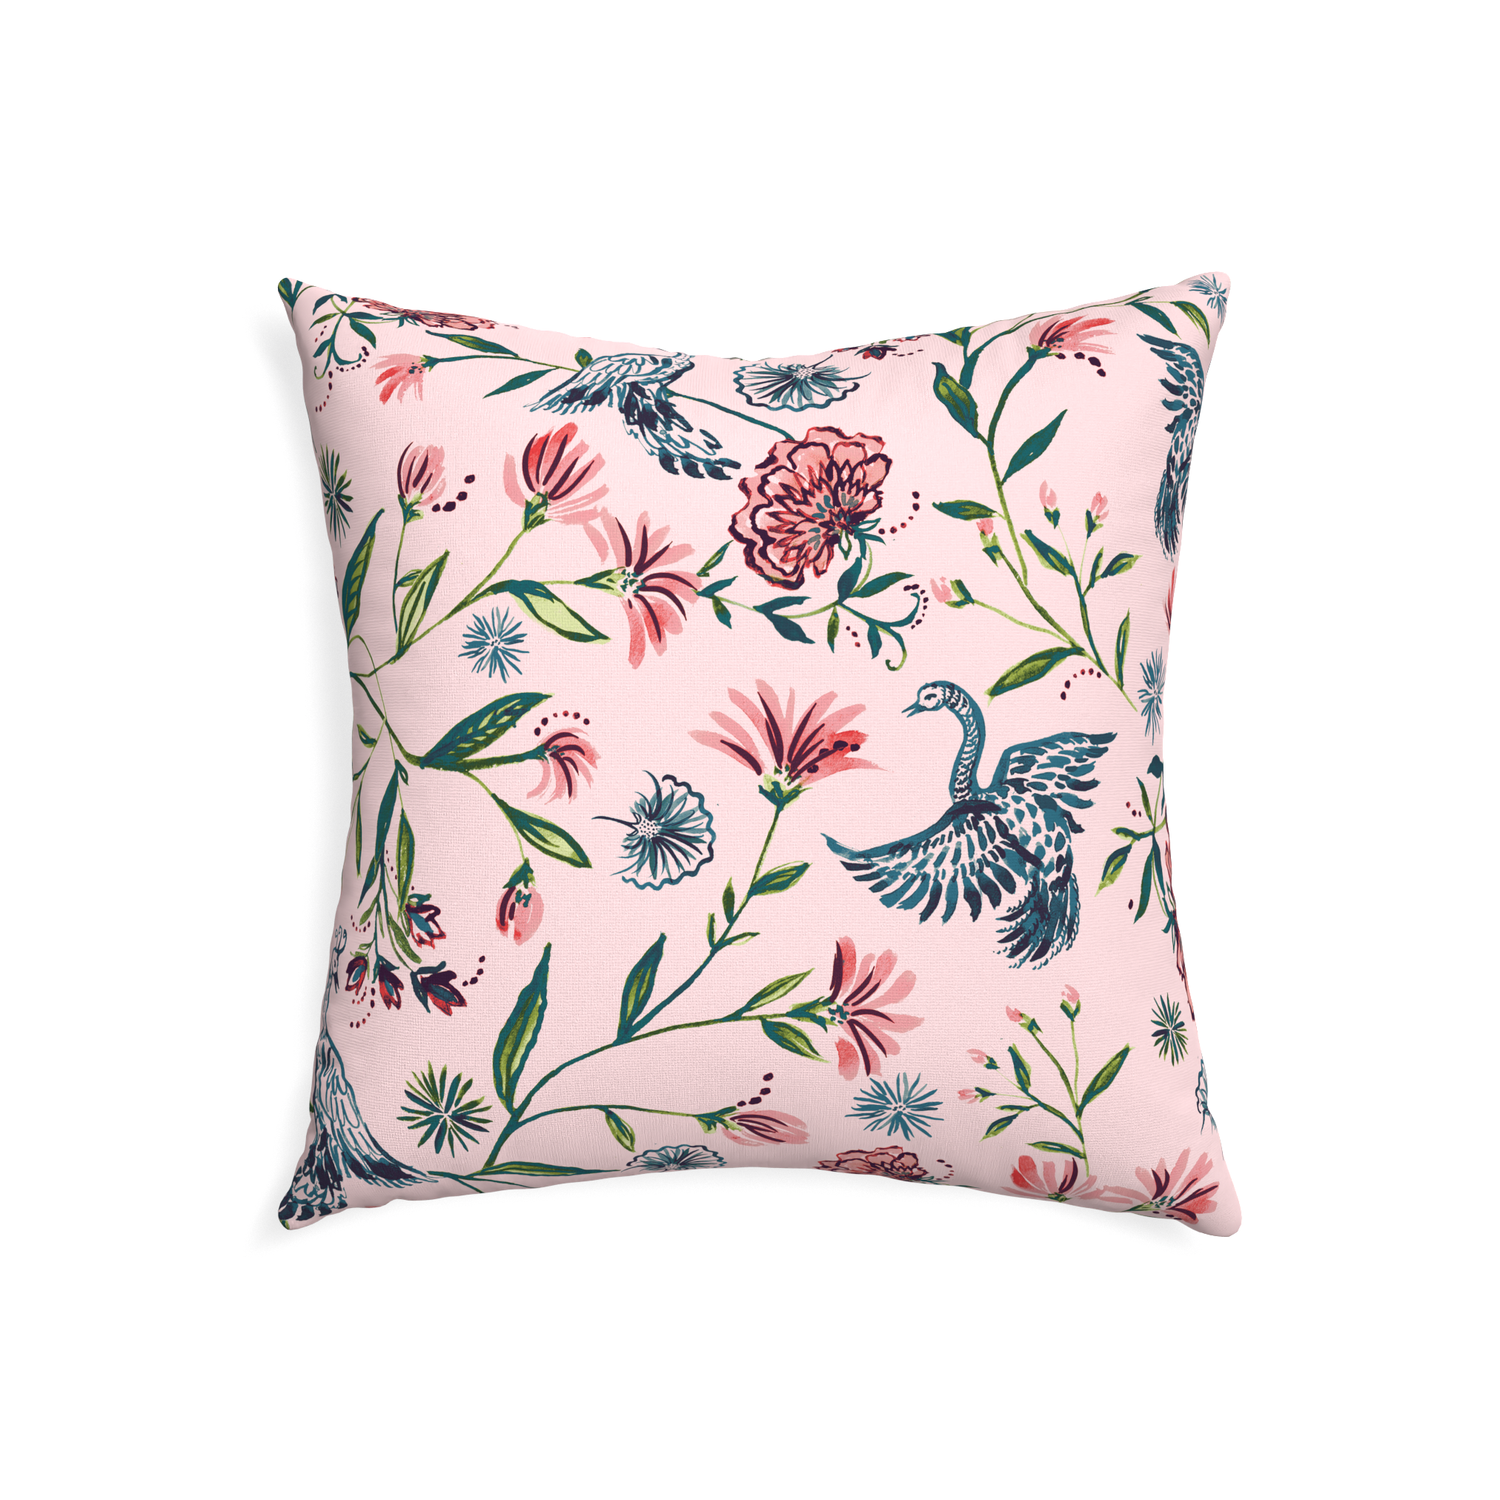 22-square daphne rose custom pillow with none on white background